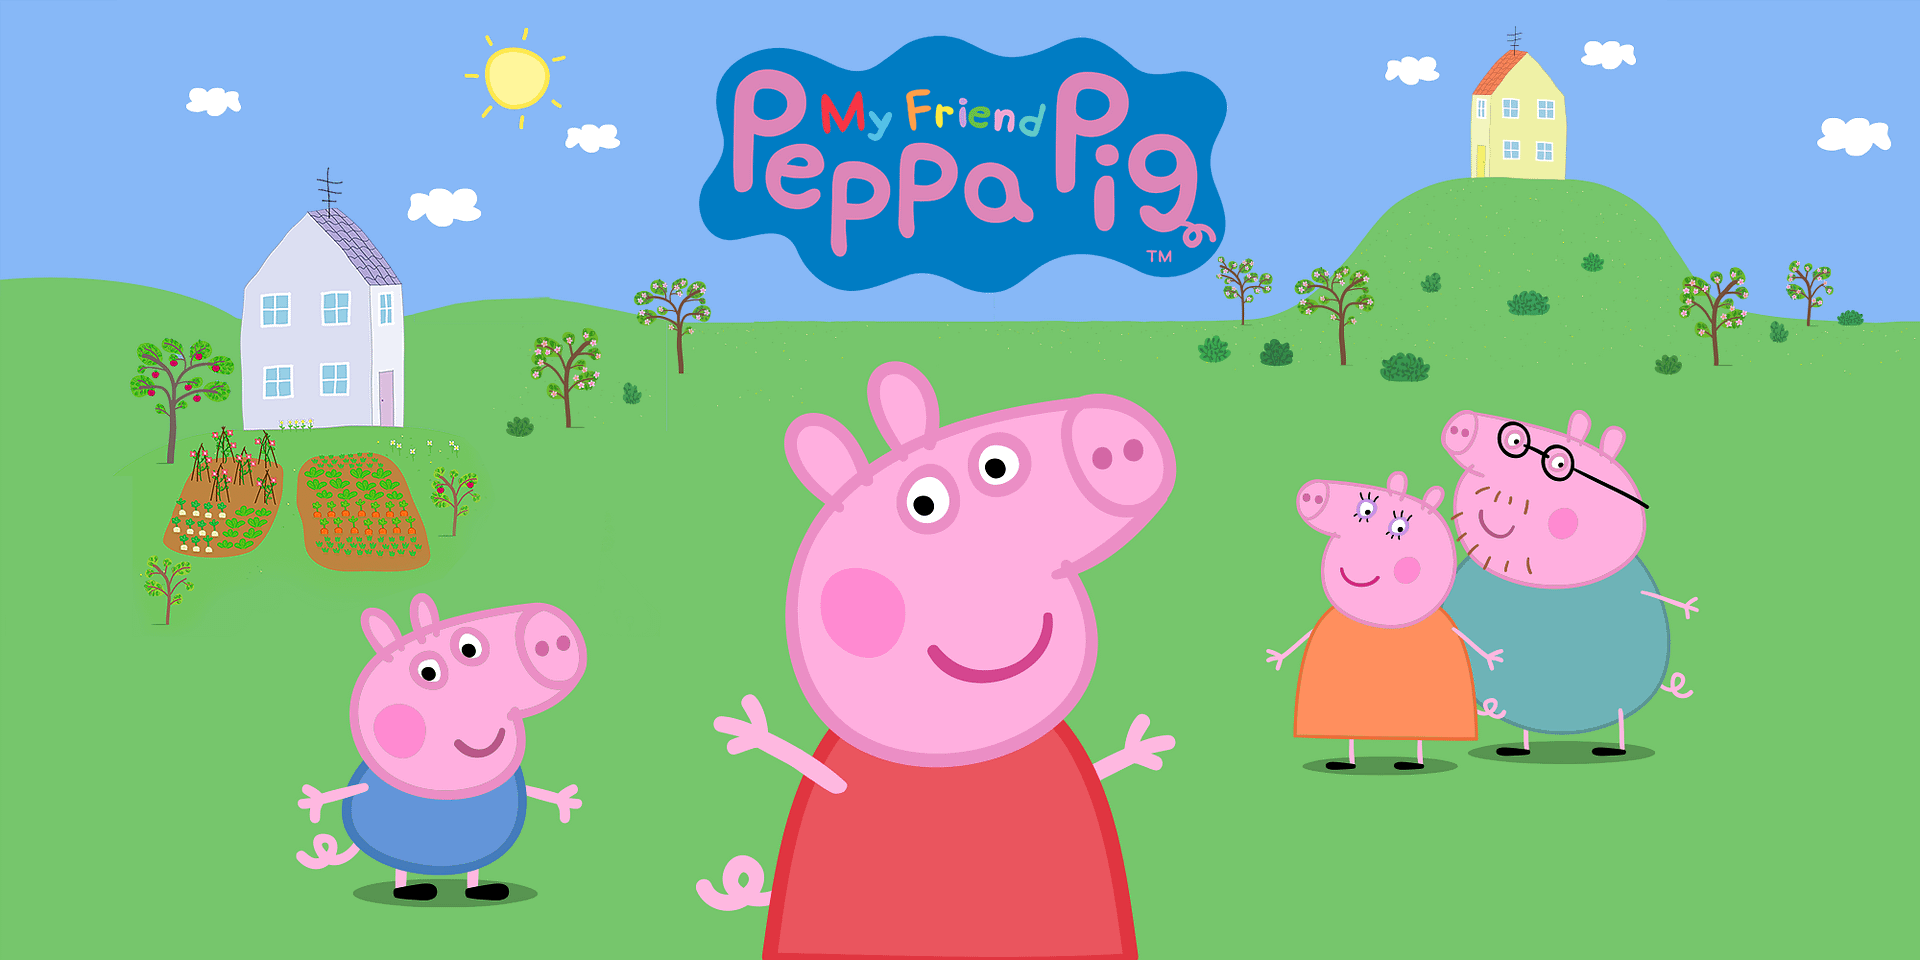 My Friend Peppa Pig Announced For PC & Consoles